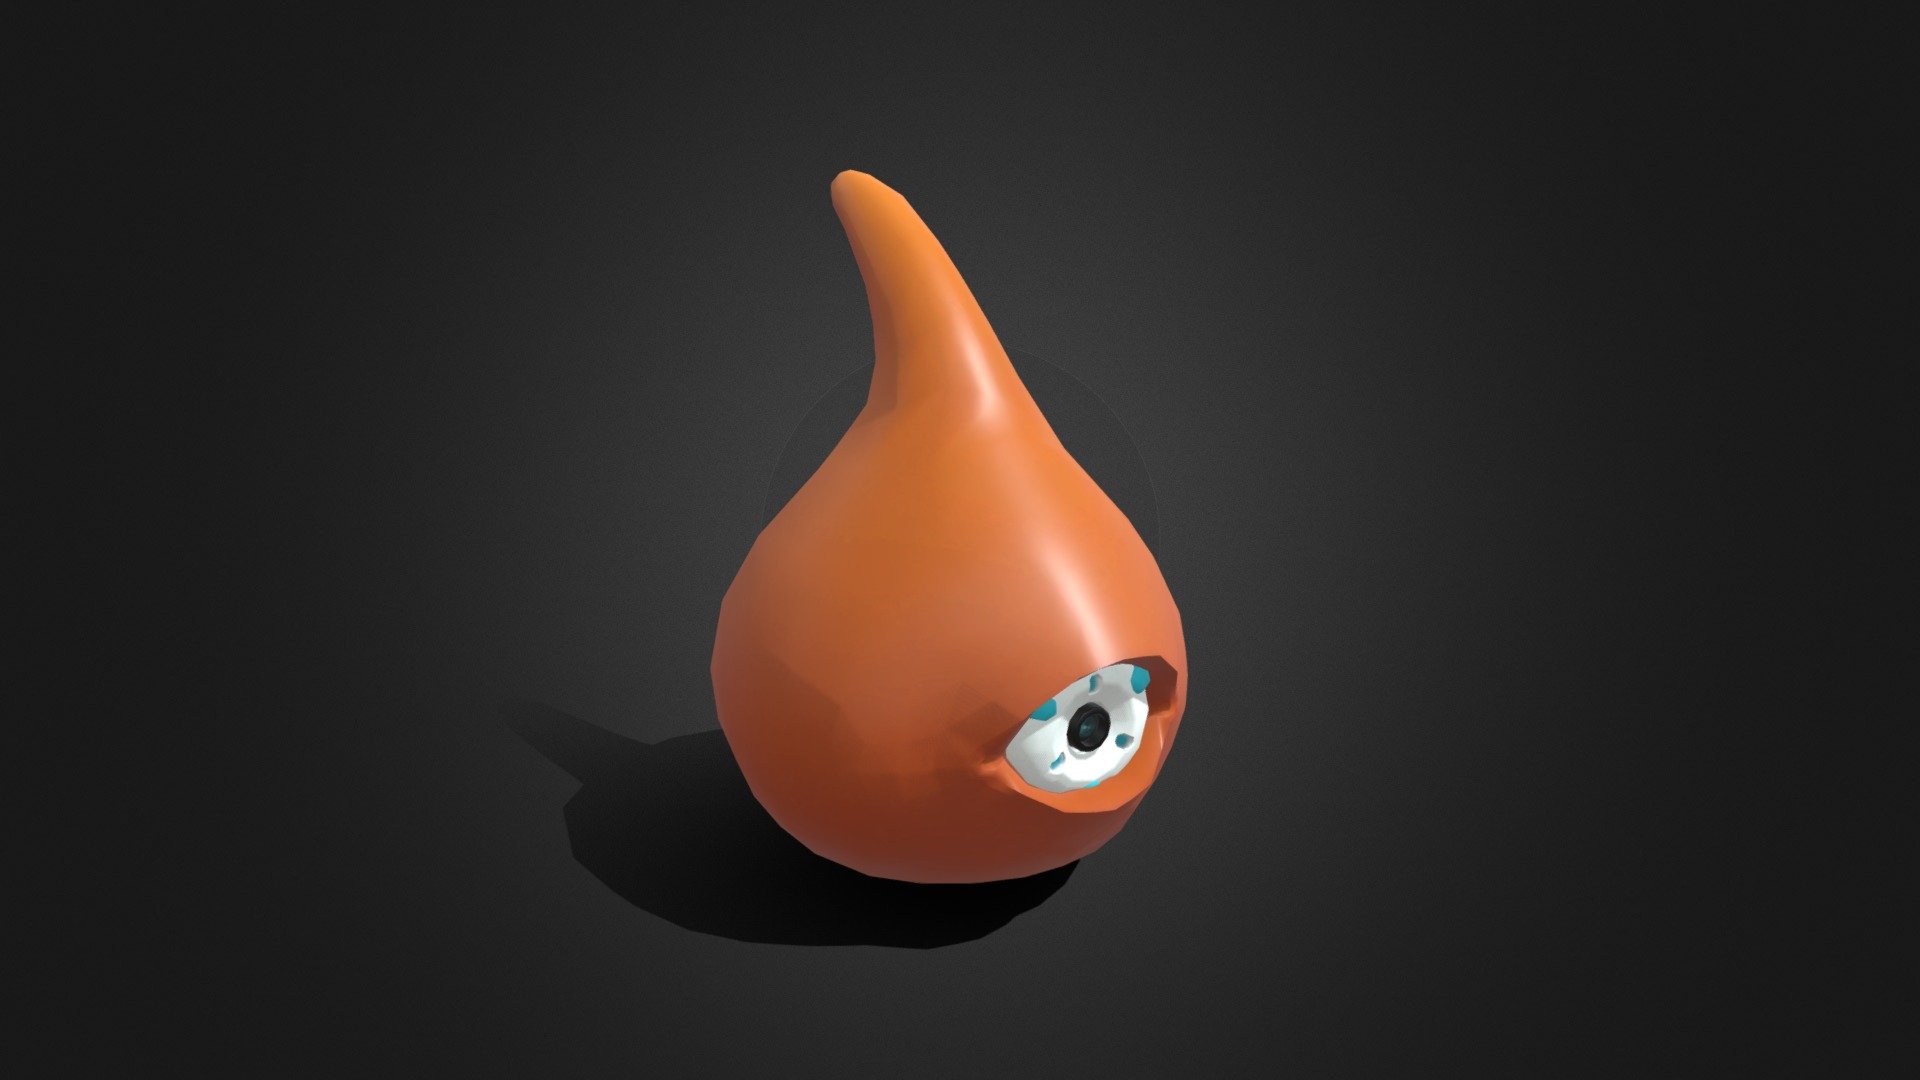 Scp 131 Orange Download Free 3d Model By Scp Scpfoundation2008 [1d3f9a1] Sketchfab